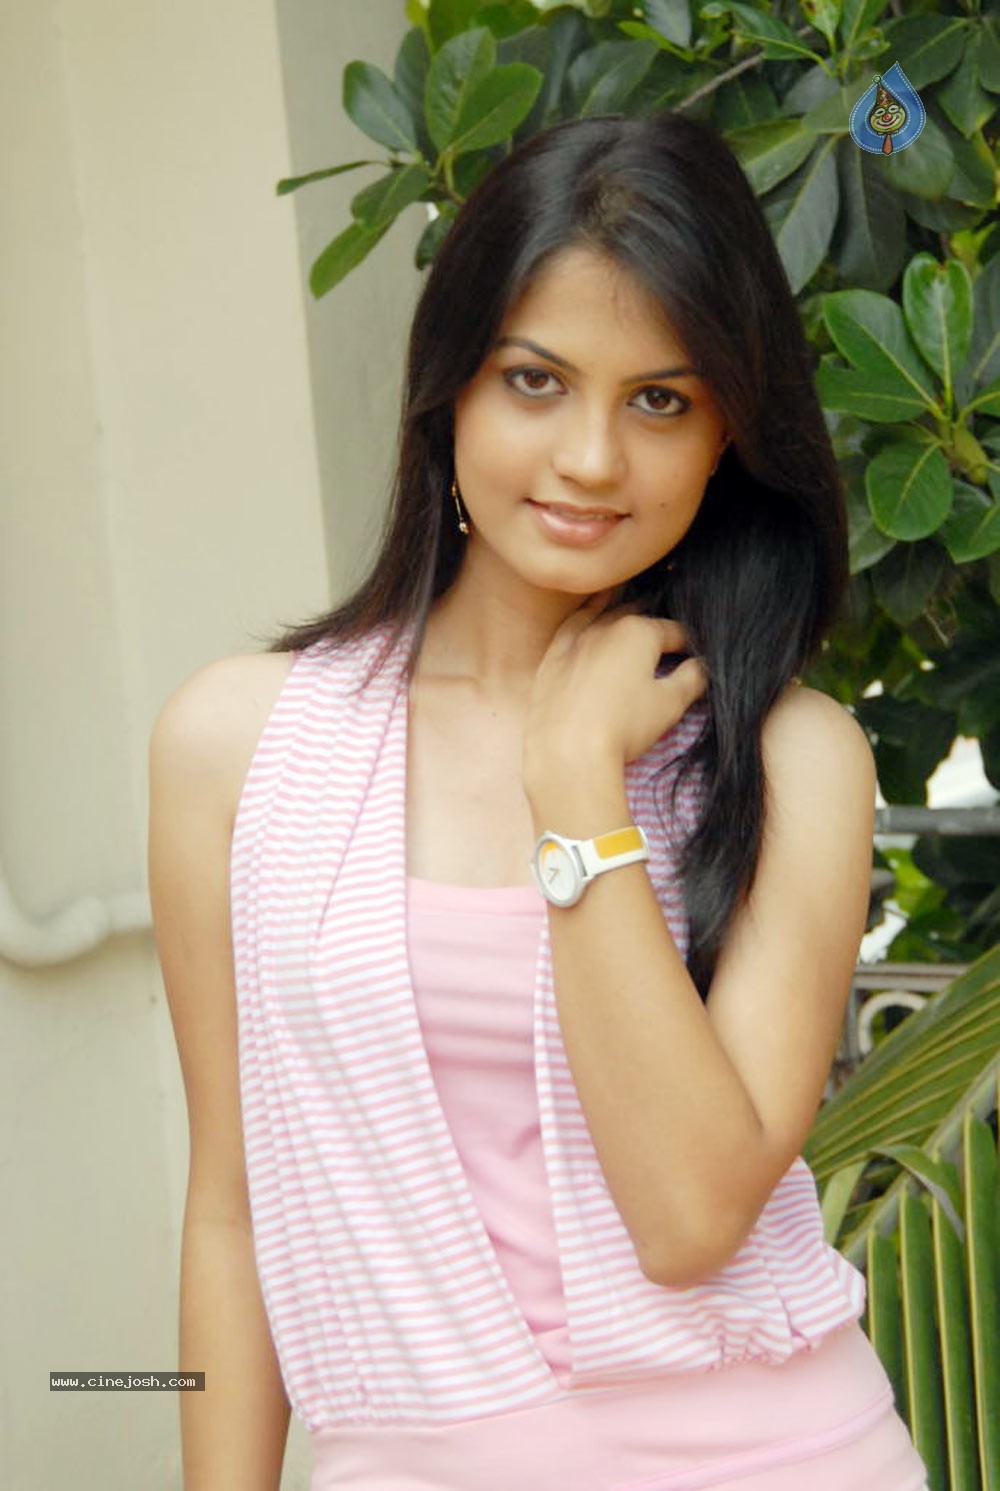 Download this Madhulika Actress... picture